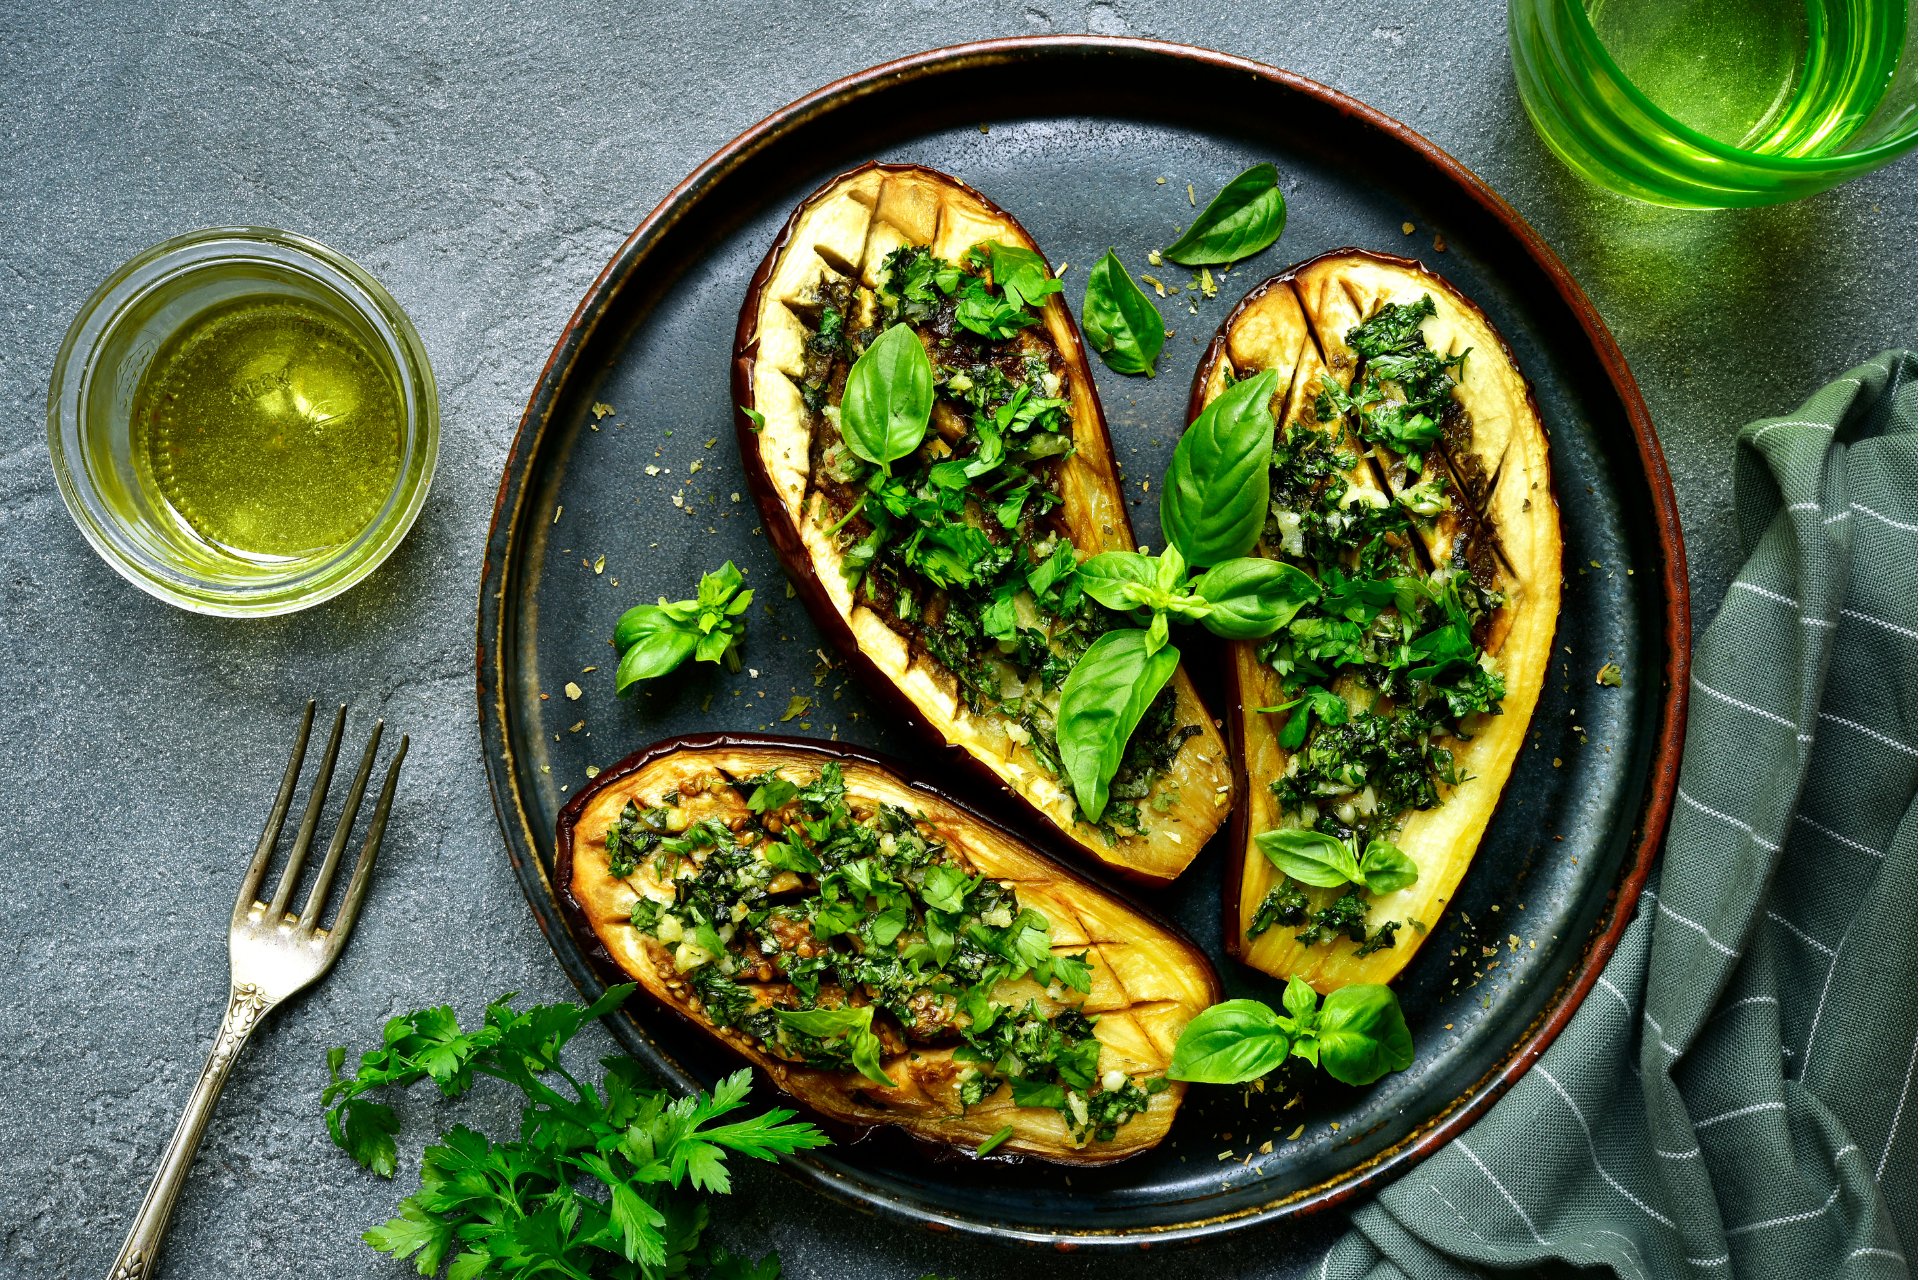 Roasted eggplant with herbs for a low-sodium diet